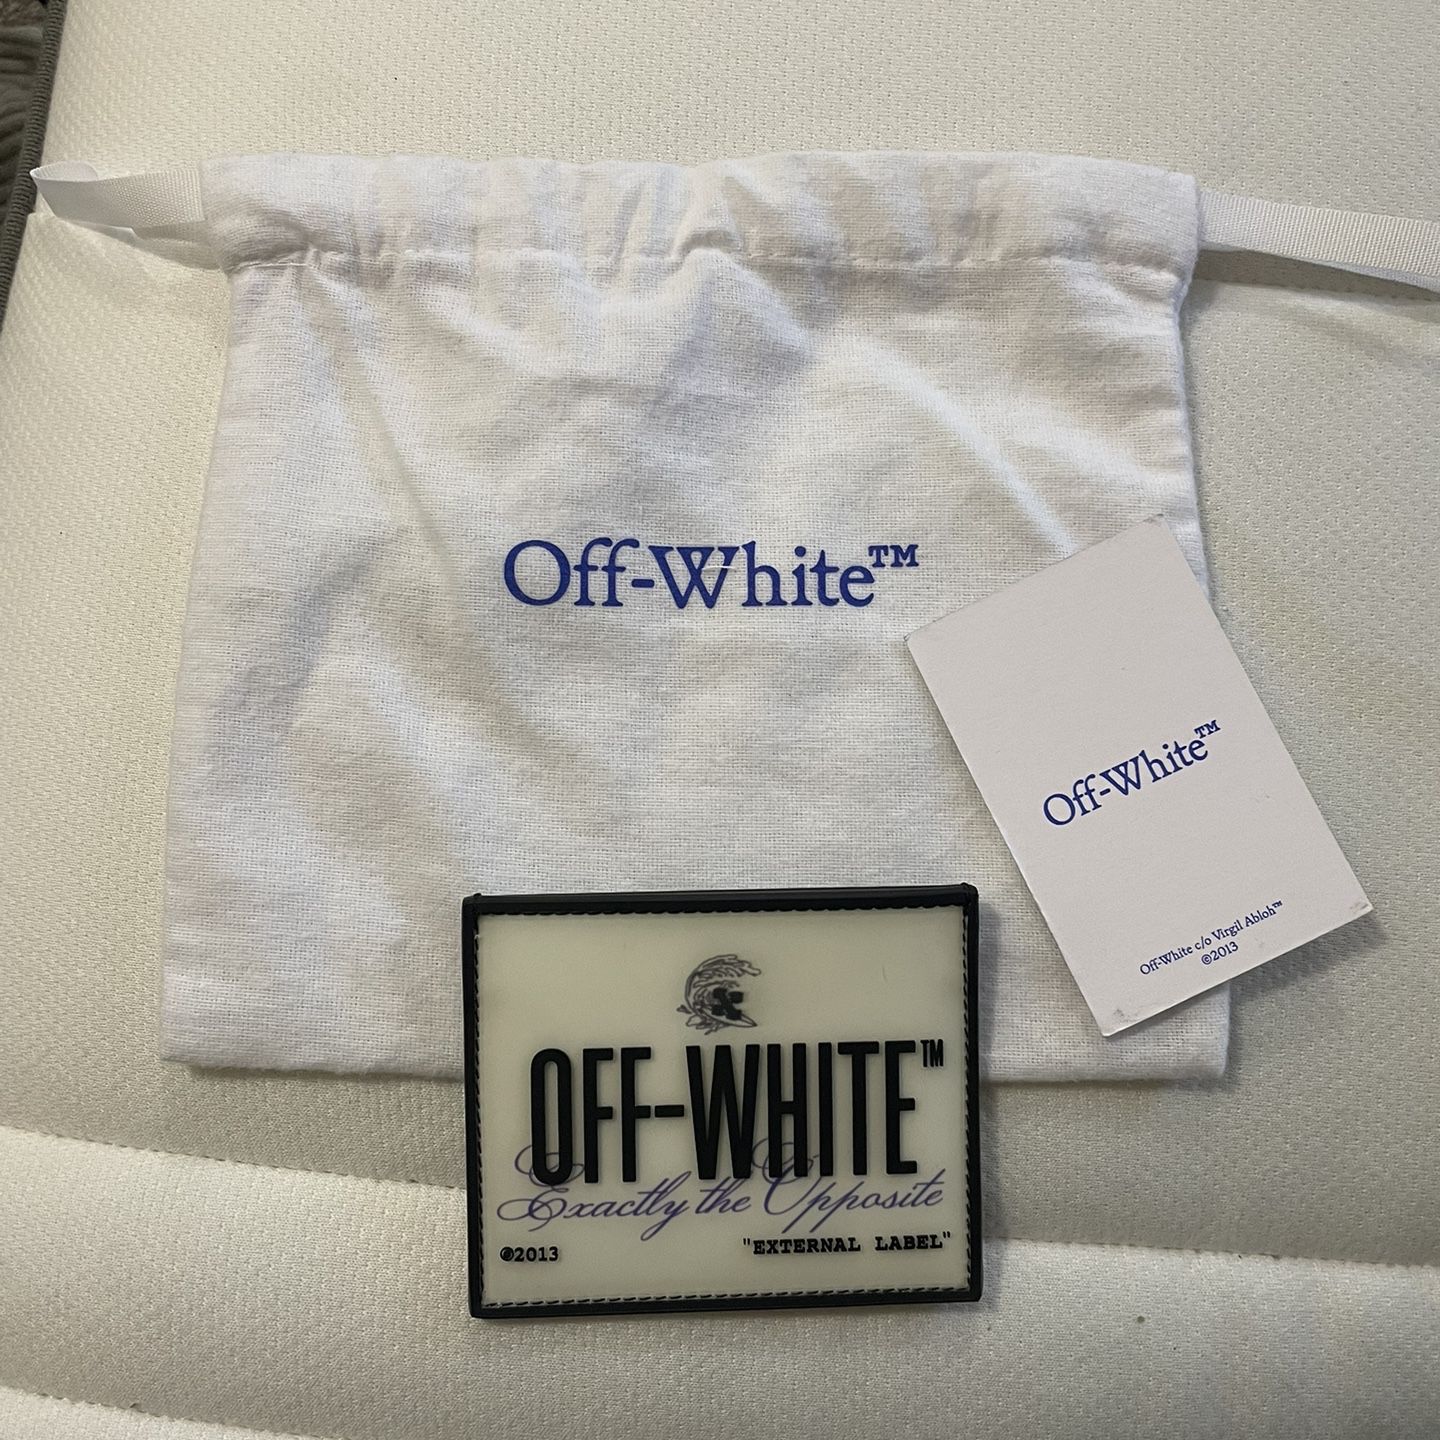 OFF WHITE exactly The Opposite Card Holder Wallet